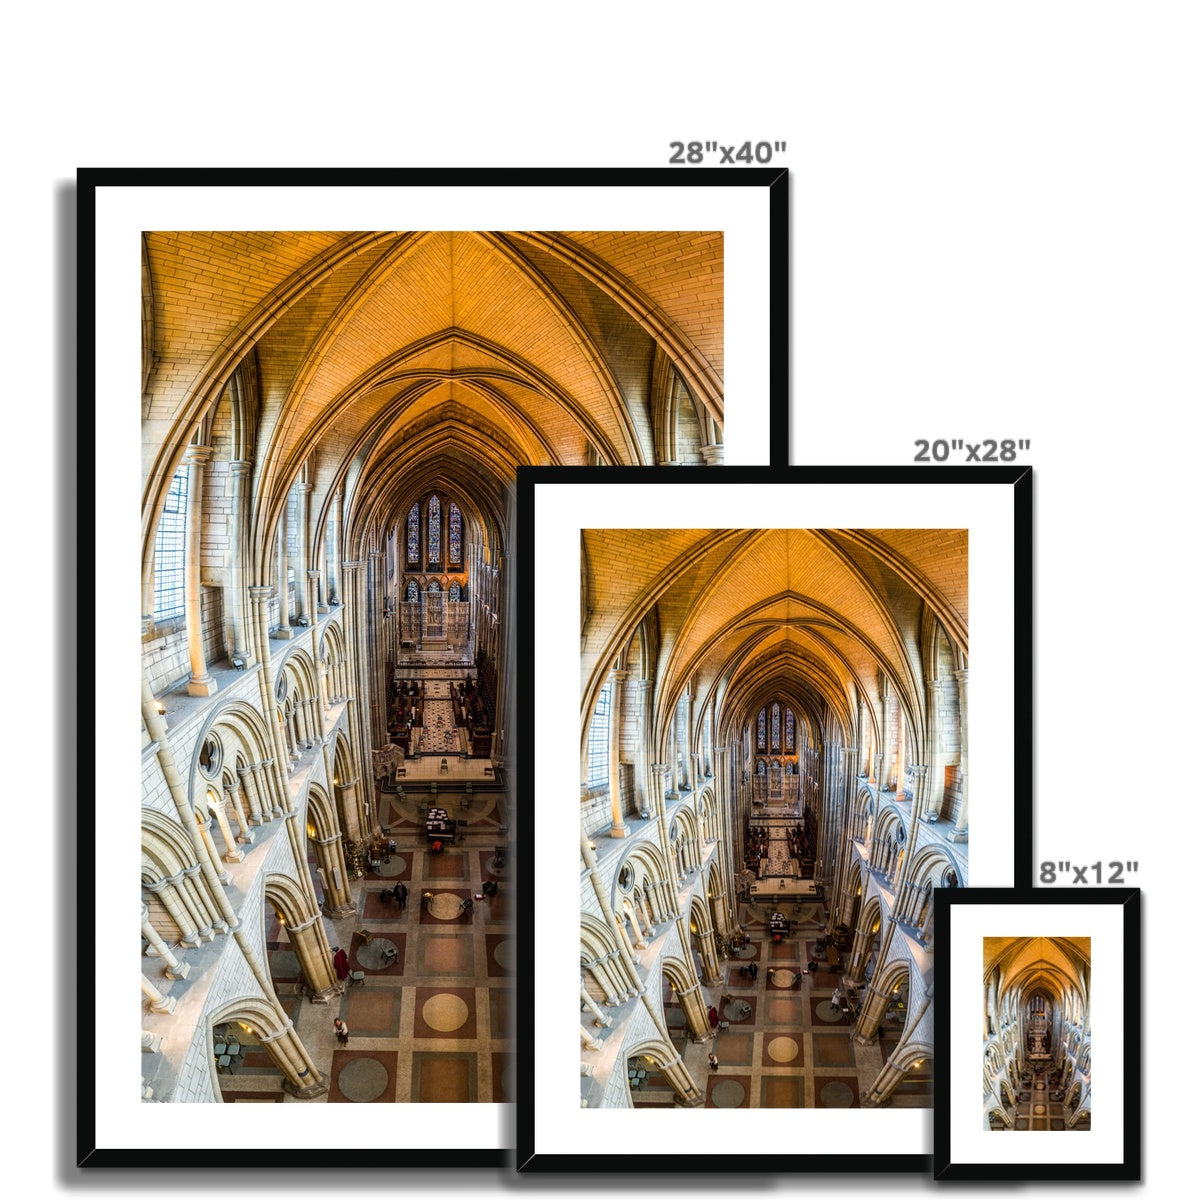 Inside Truro Cathedral ~ Framed & Mounted Print